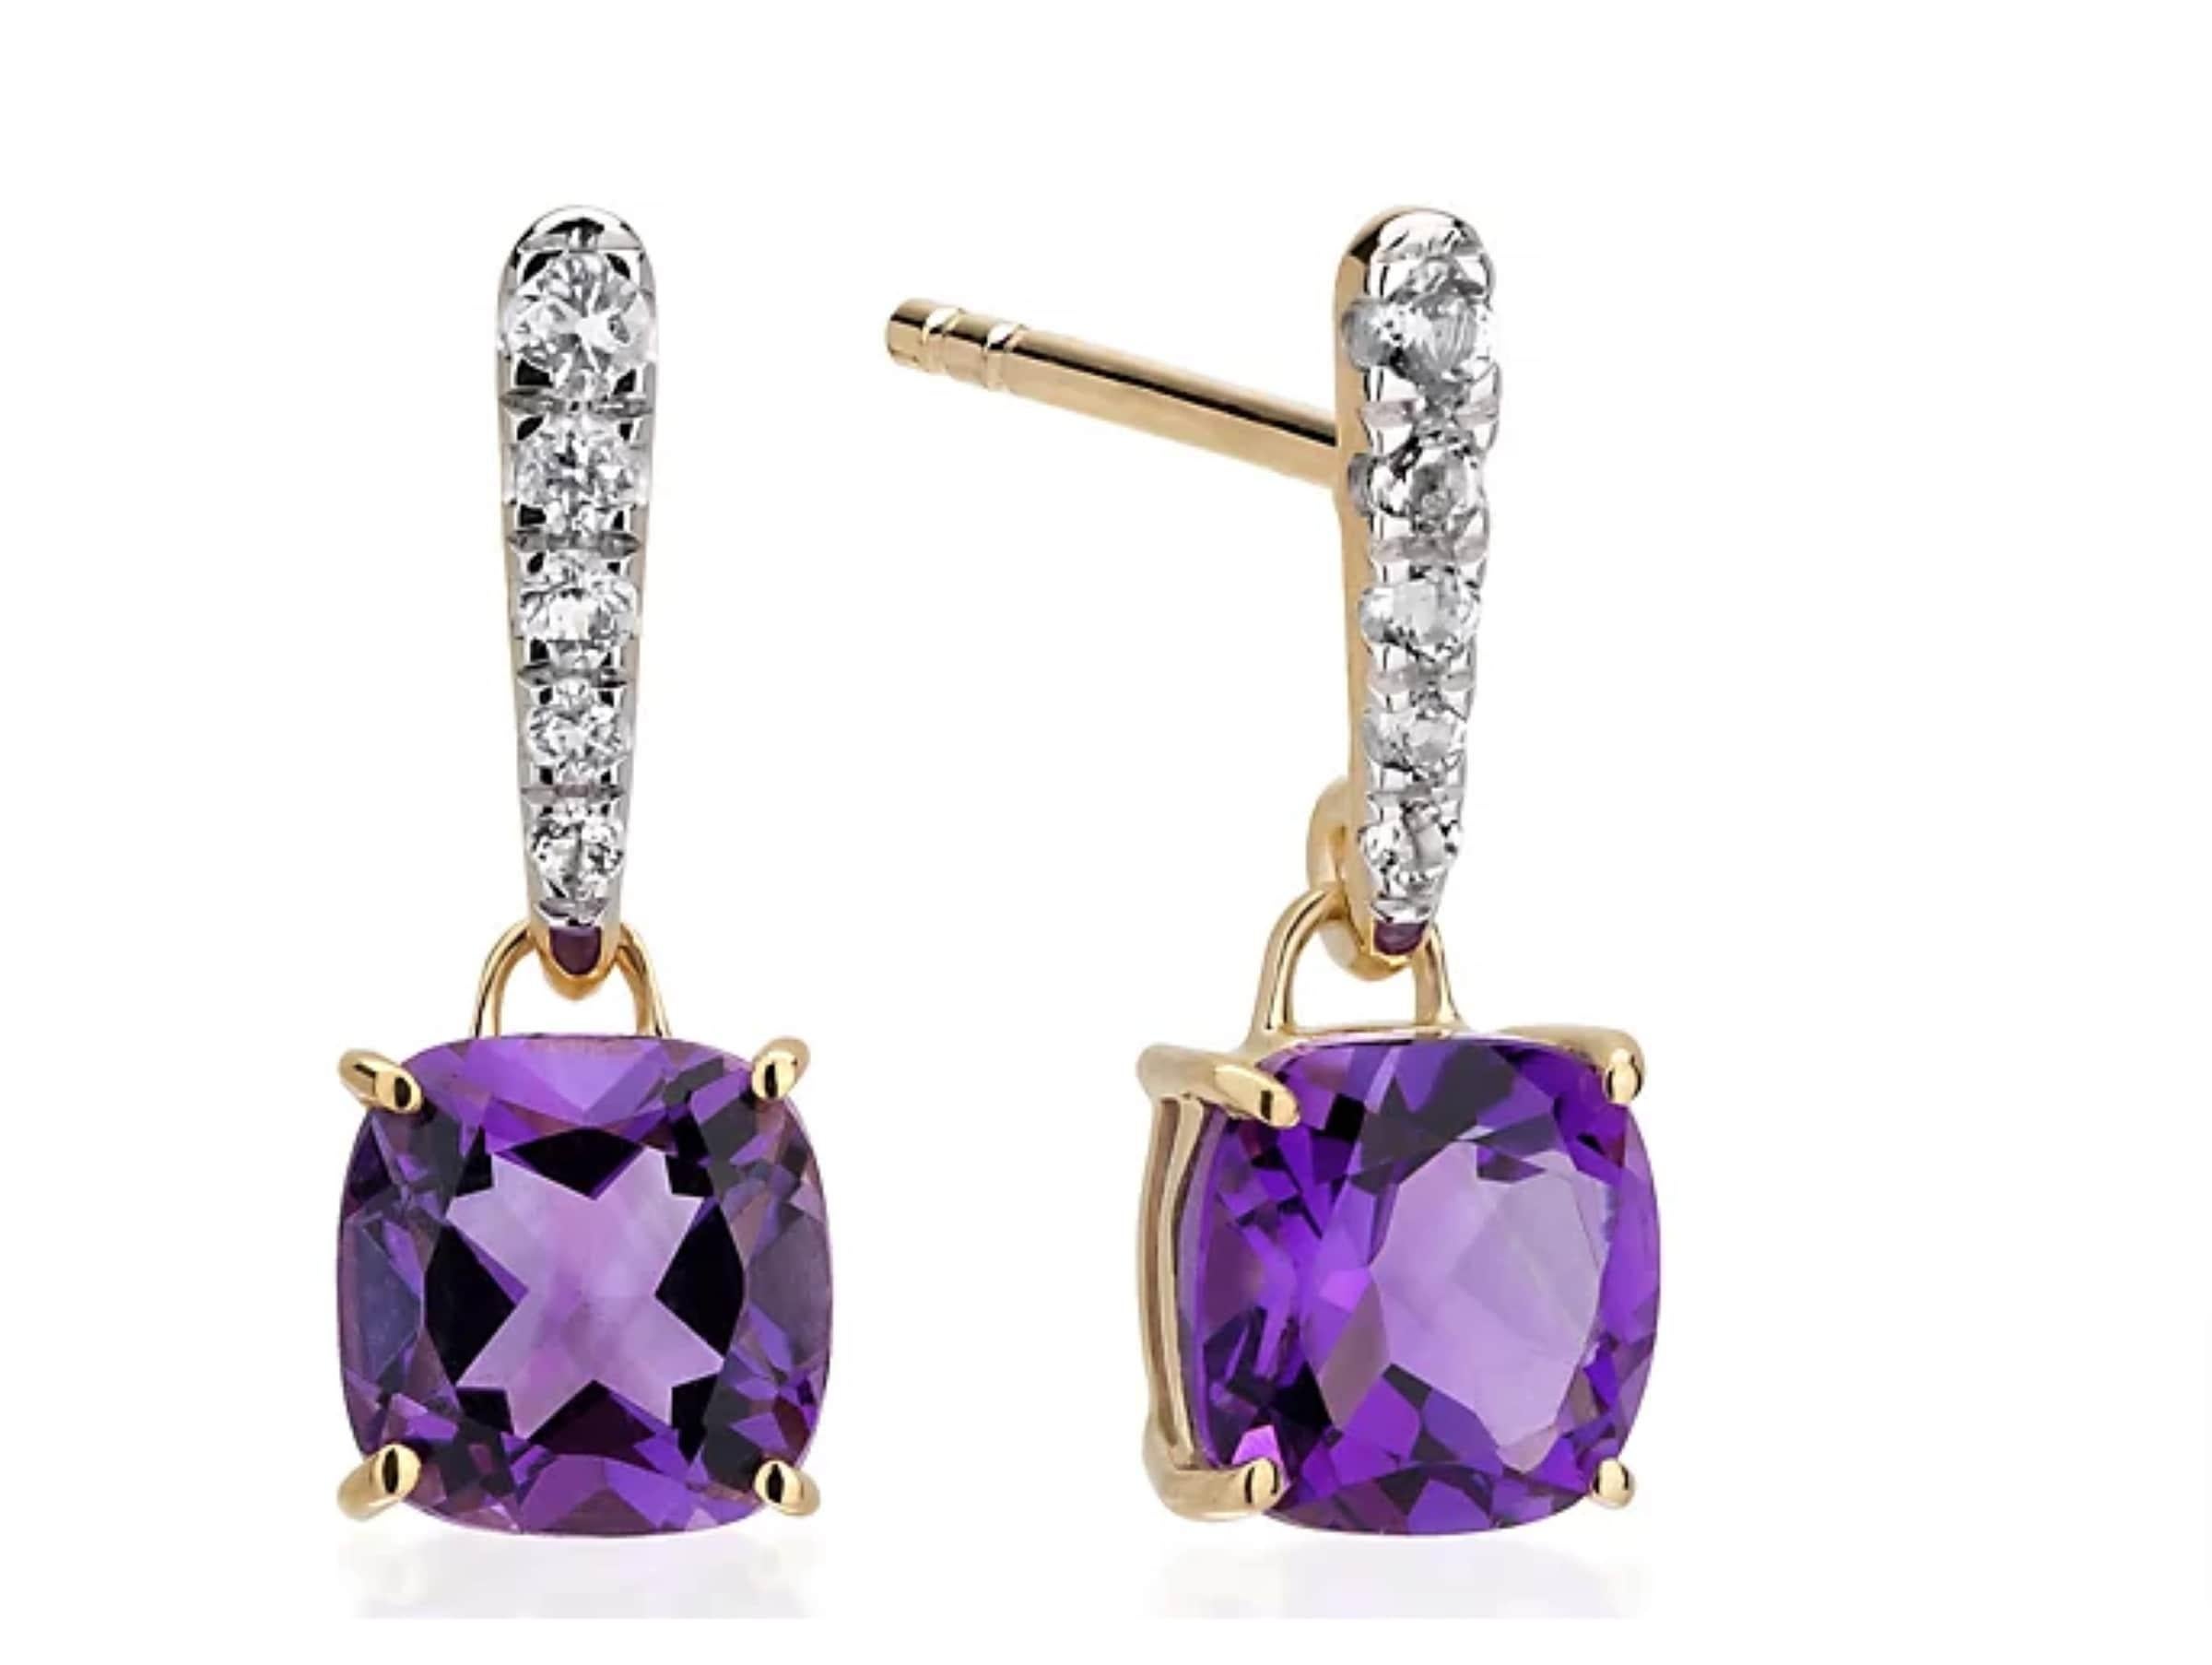 Cushion Cut Gemistry 1.1 Cts. Cushion Amethyst and 0.16 Cts. Topaz Drop Earrings in 14K Gold